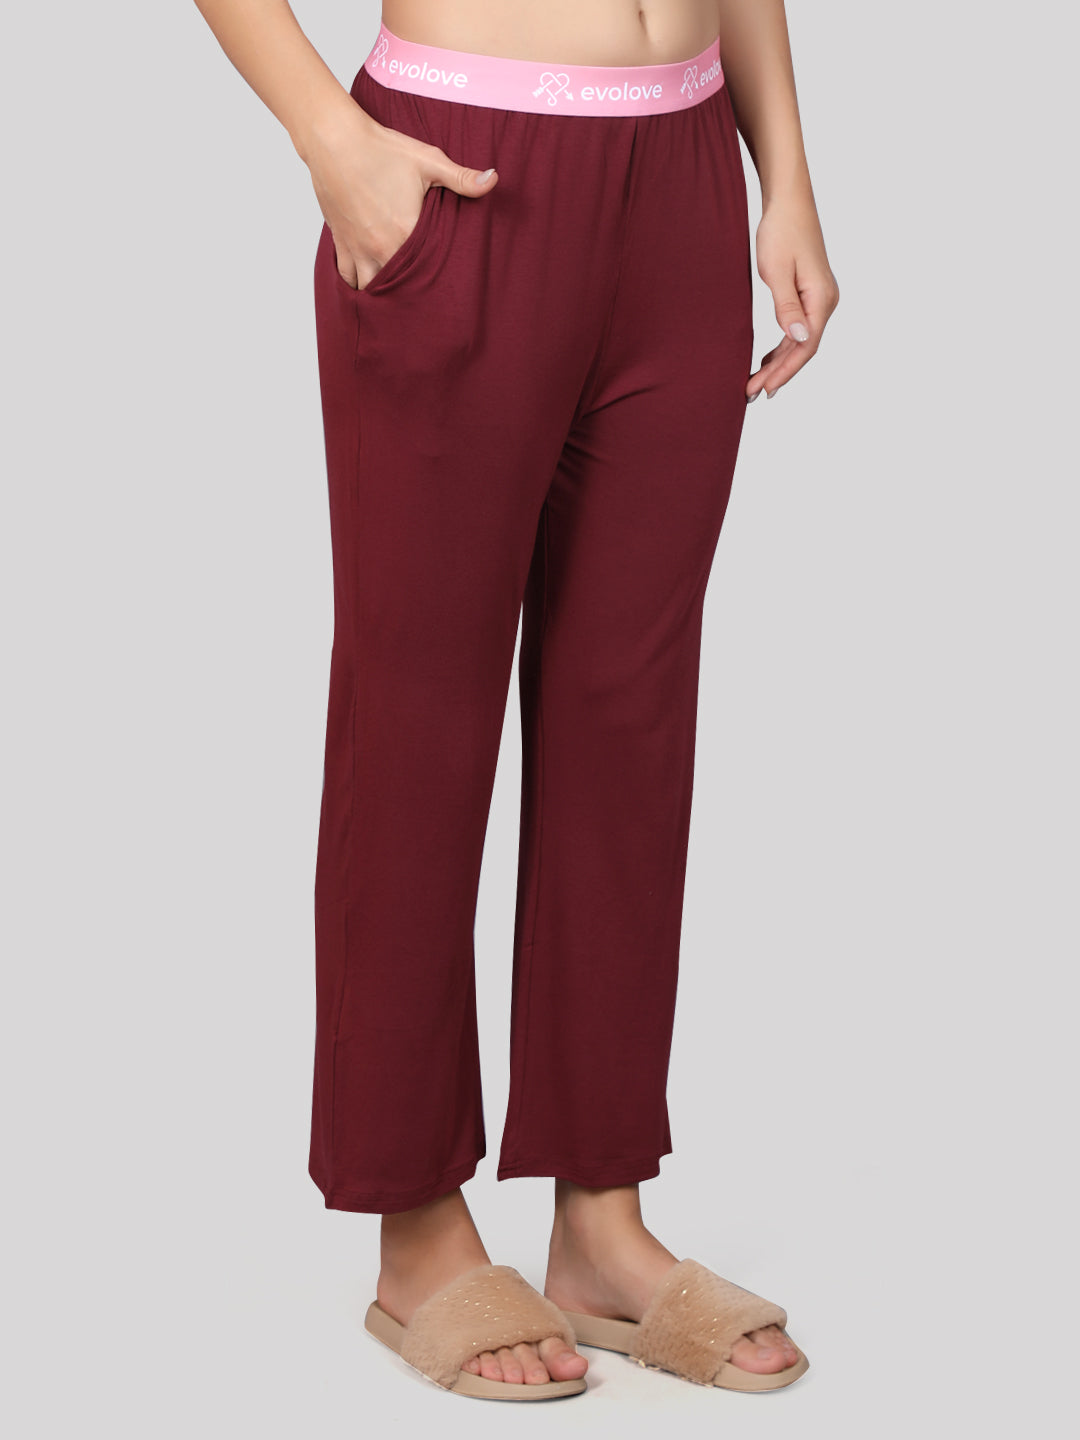 Evolove Women's Micro Modal Solid Pyjama Relaxed Lounge Pants with Pockets Super Soft Comfortable